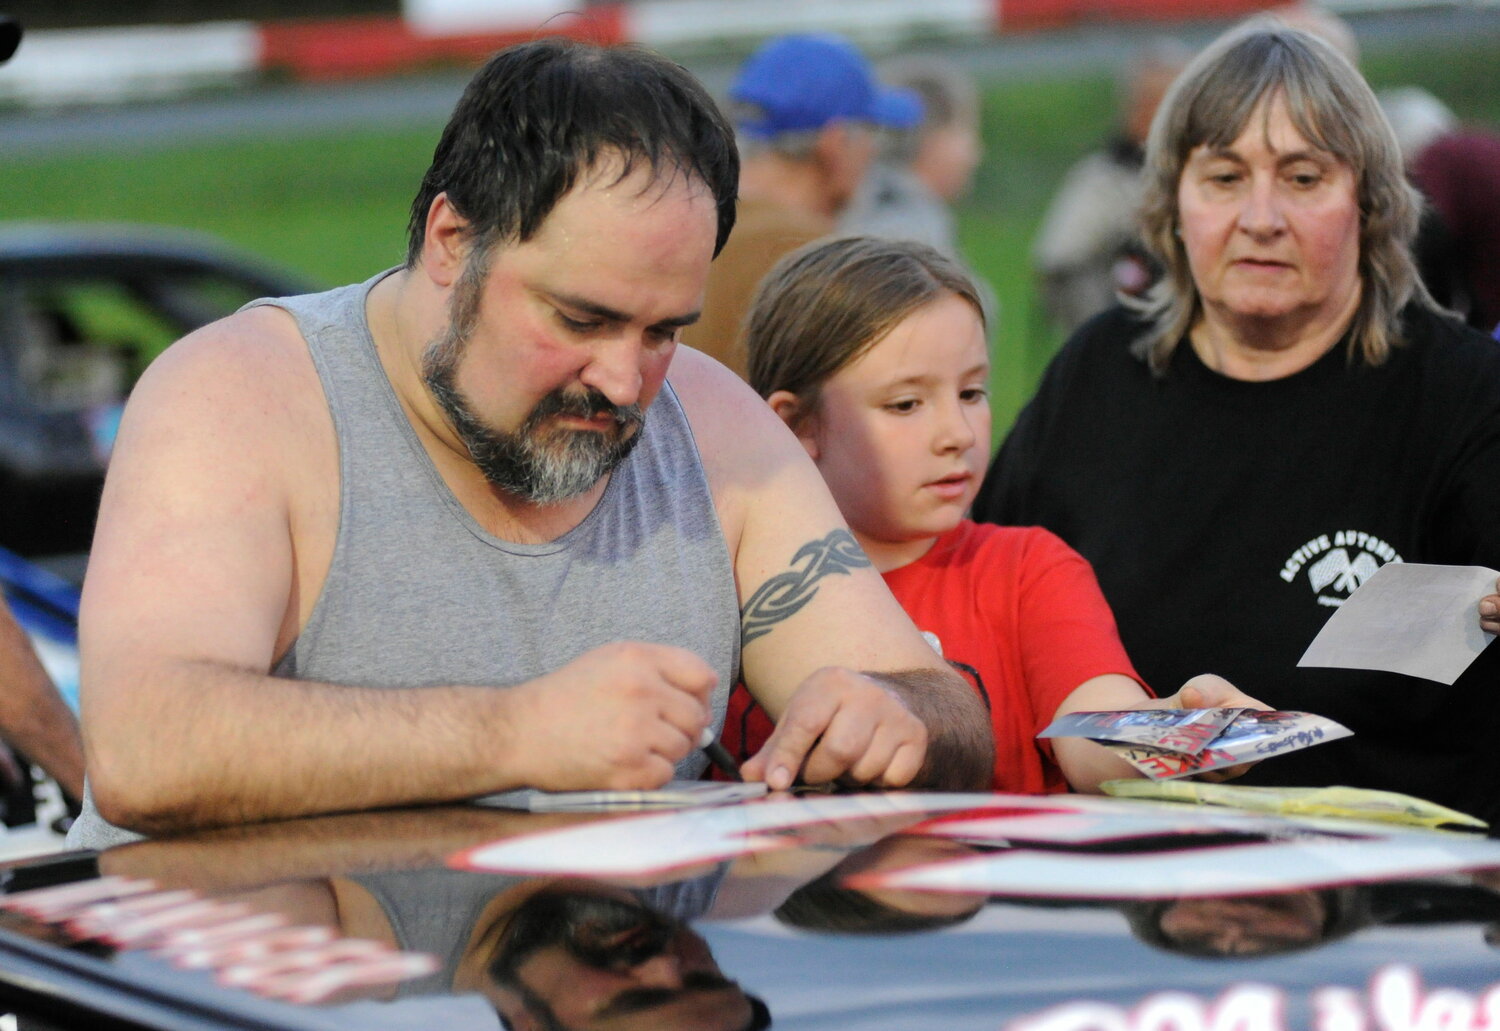 Mike Dutka, a noted NASCAR asphalt modified driver, signs a photo for a young fan of auto sports.